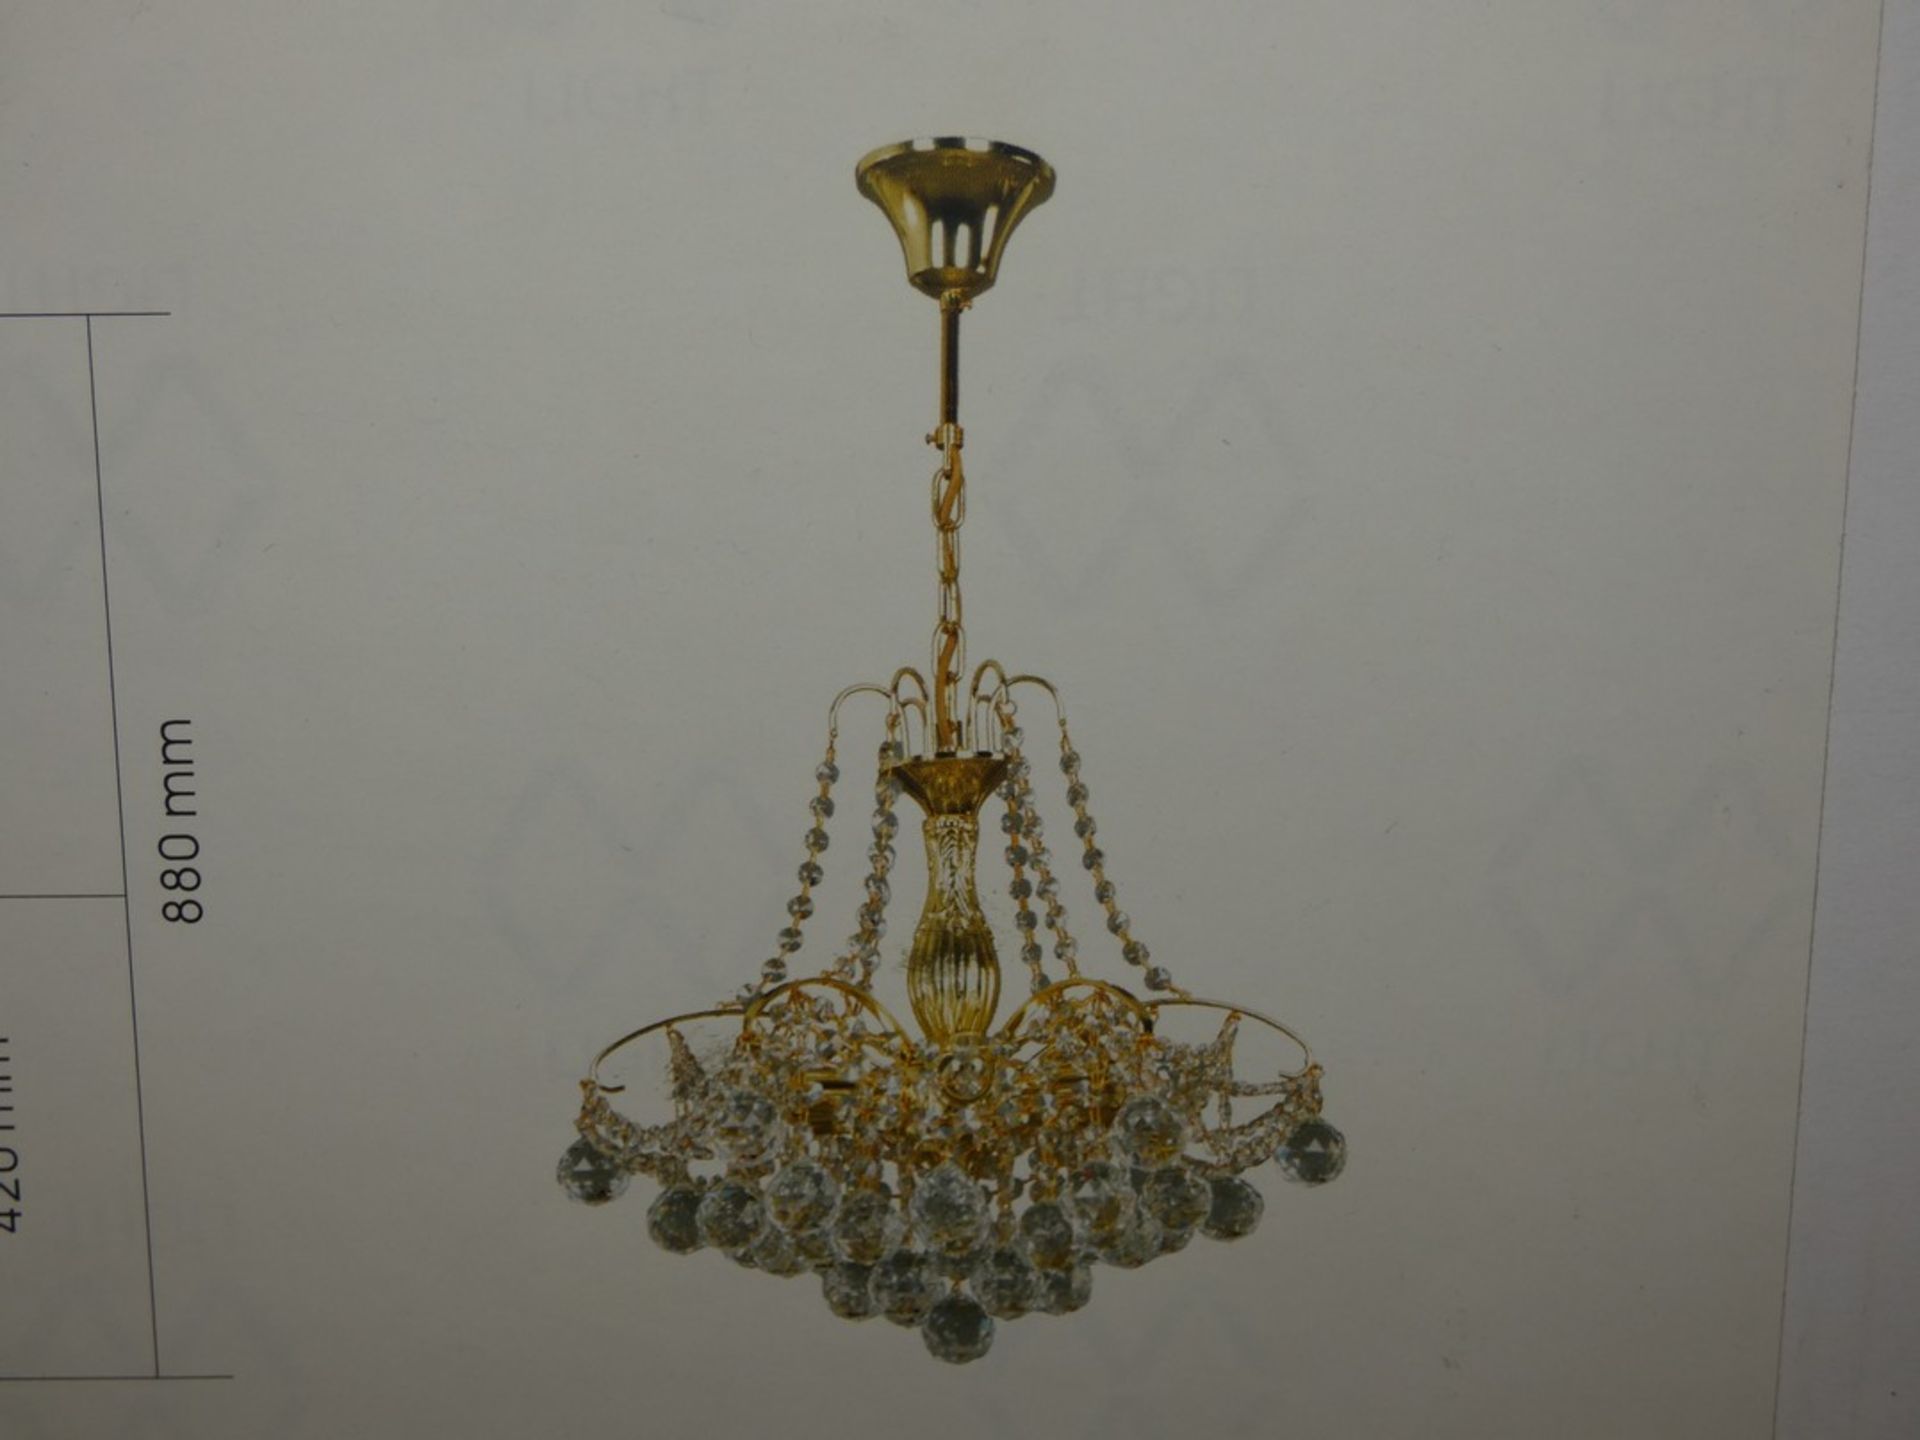 Boxed MW Lighting Glass Bowl and Gold Droplet Designer Ceiling Light (14142) (Public Viewing and